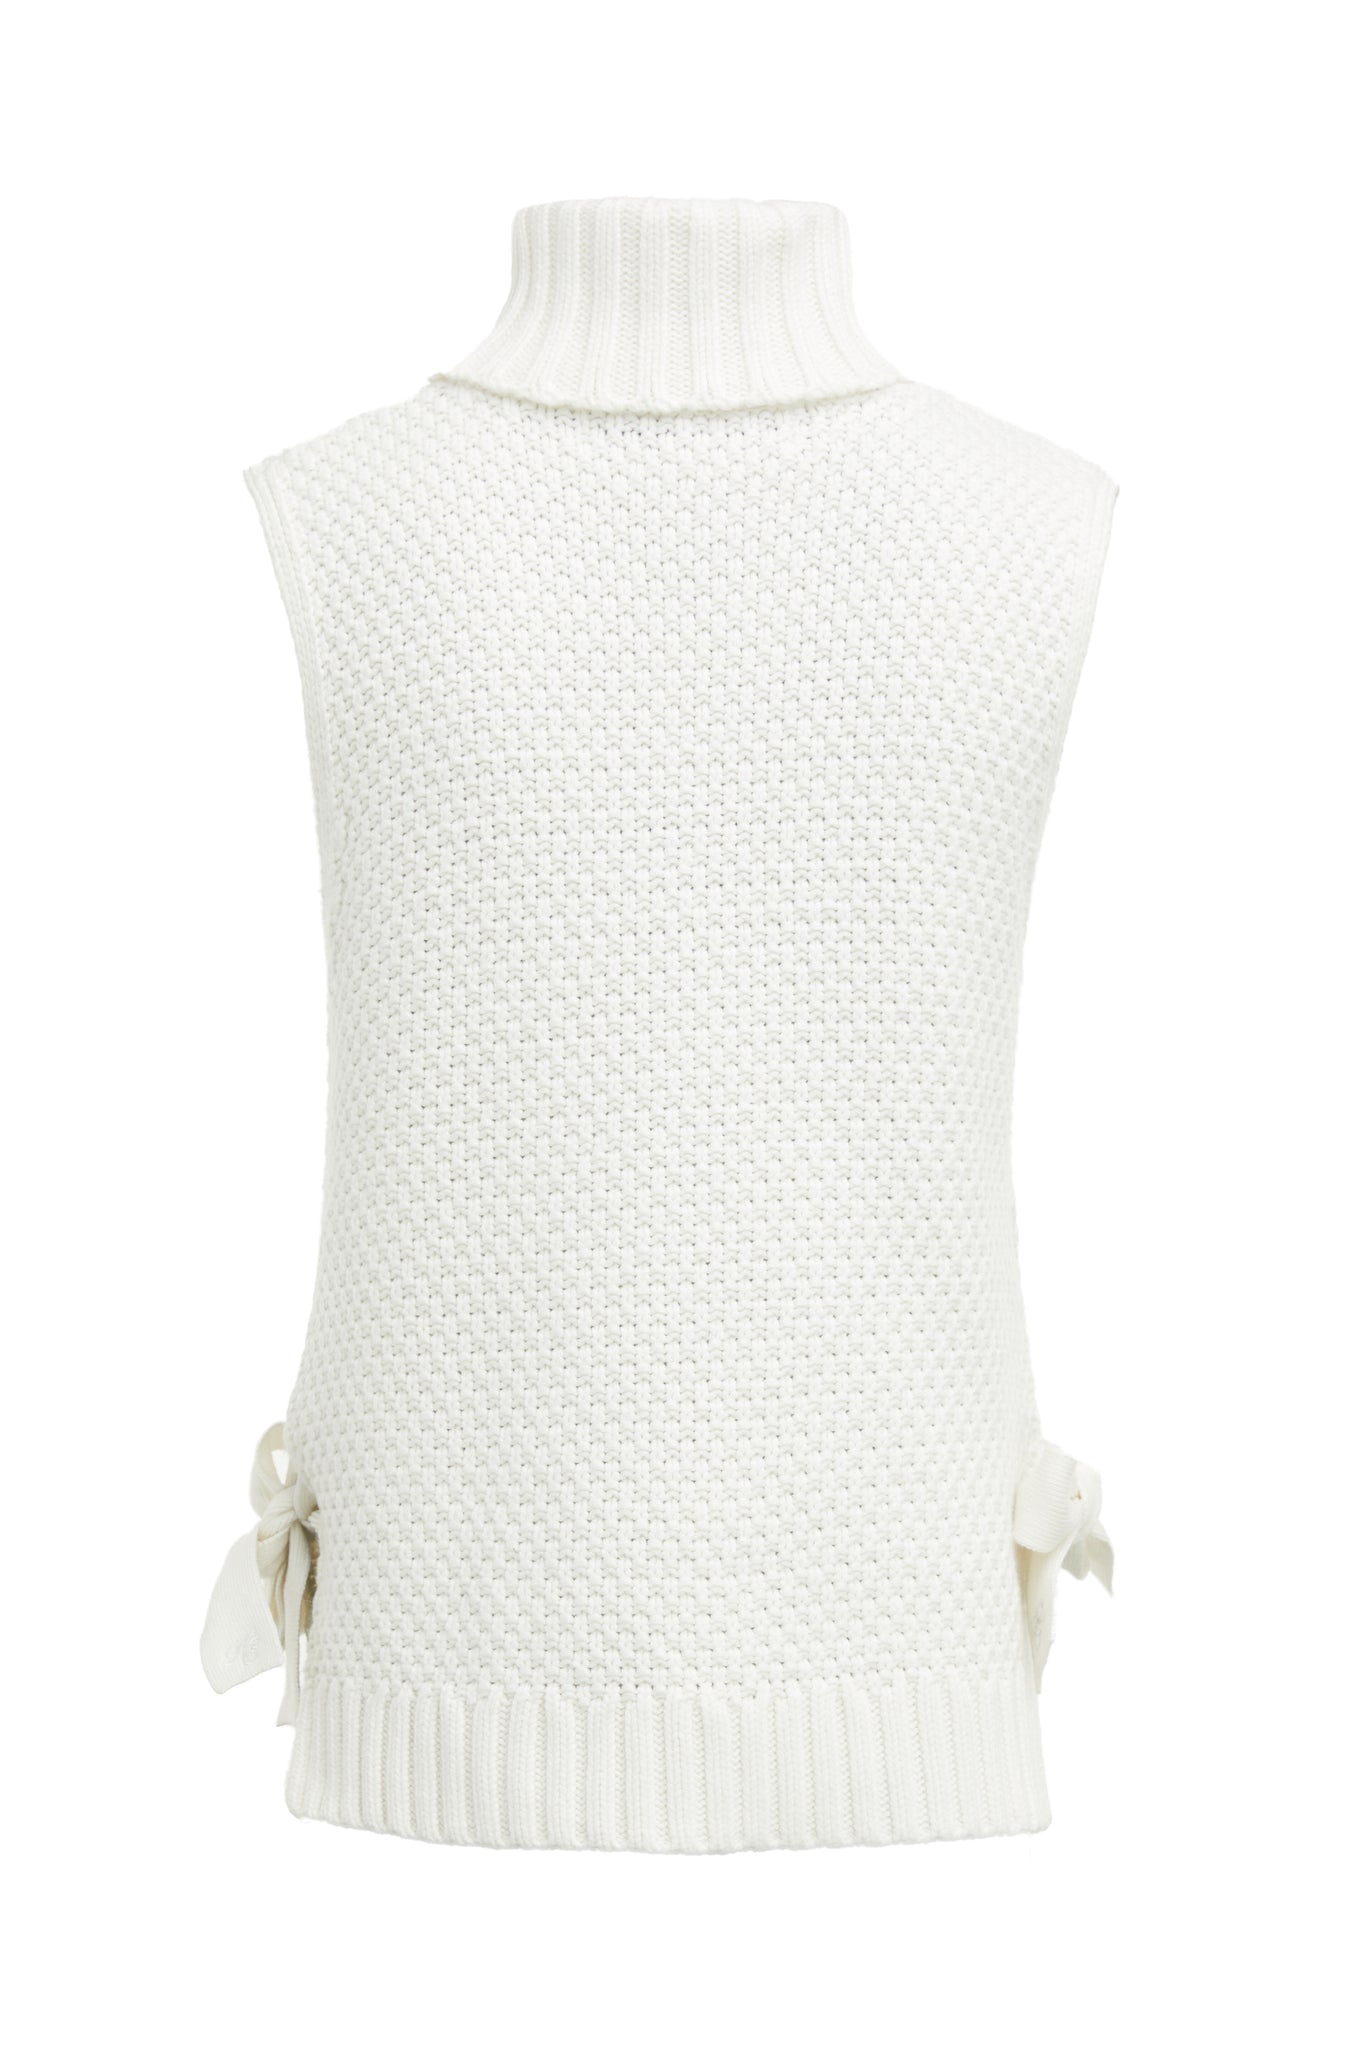 Back of sleeveless white chunky knit cable jumper with a roll neck and ties at each side 